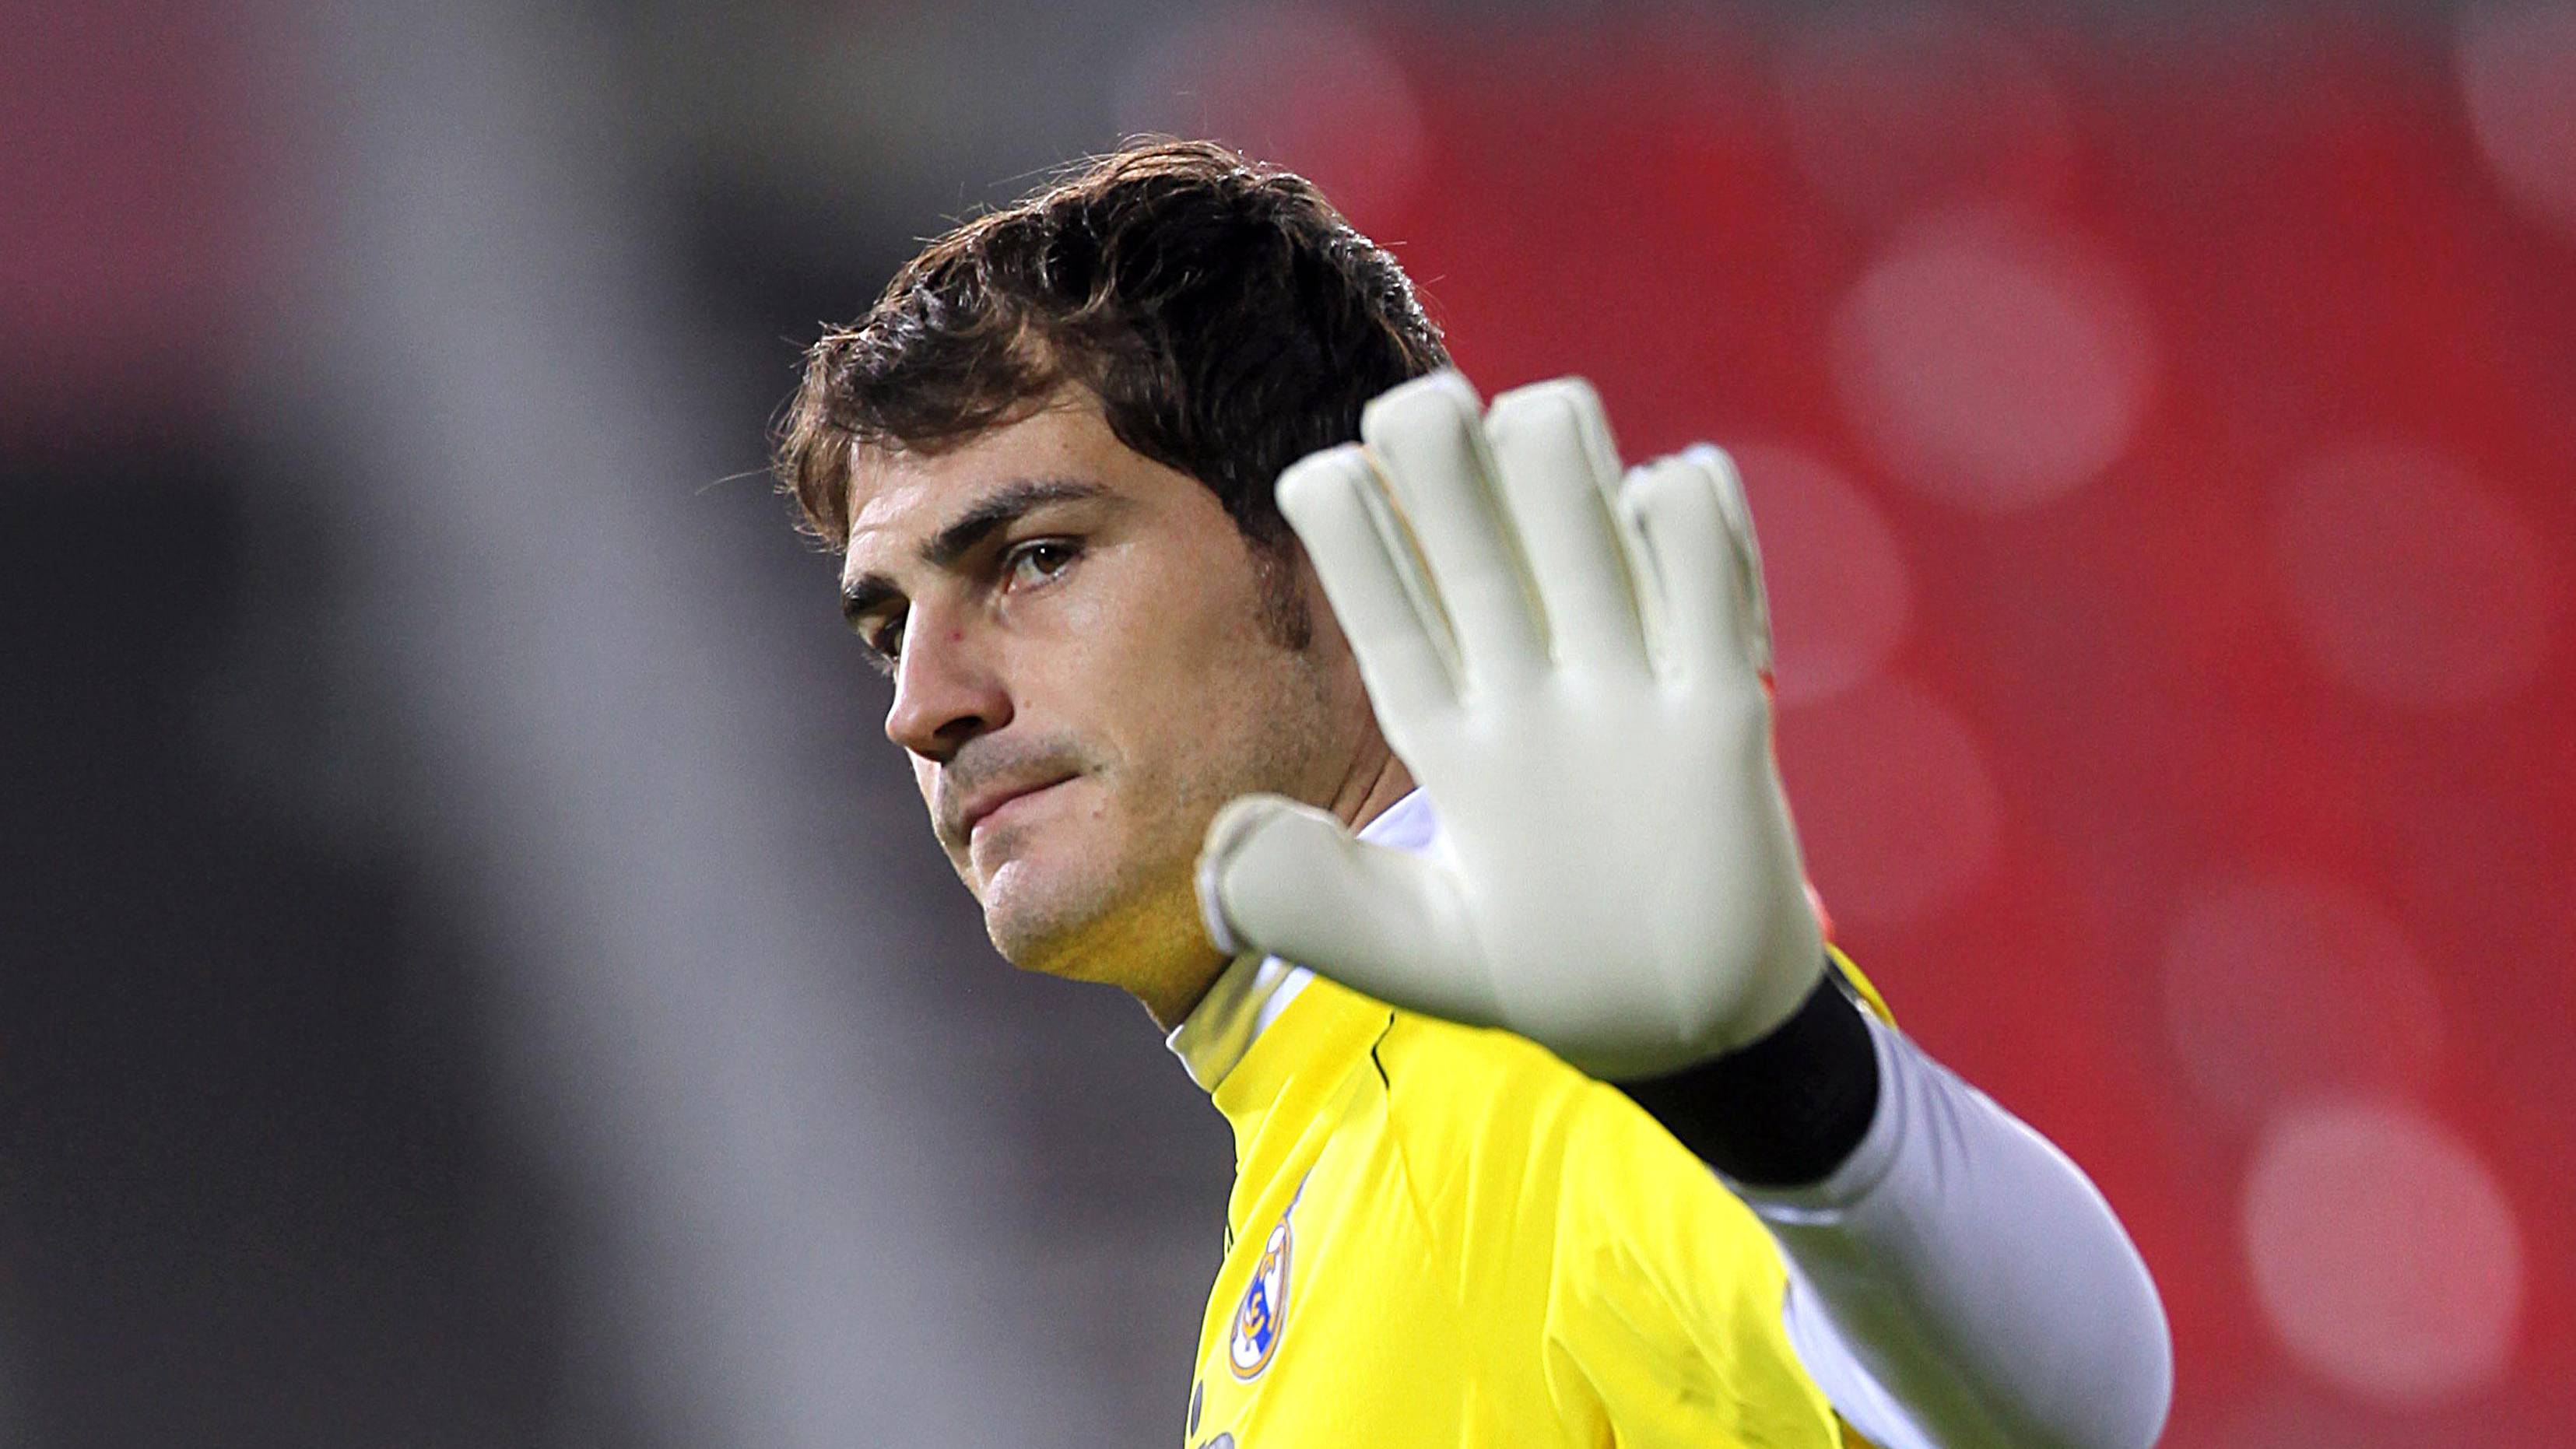 Iker Boxes, asking pardon with the hand